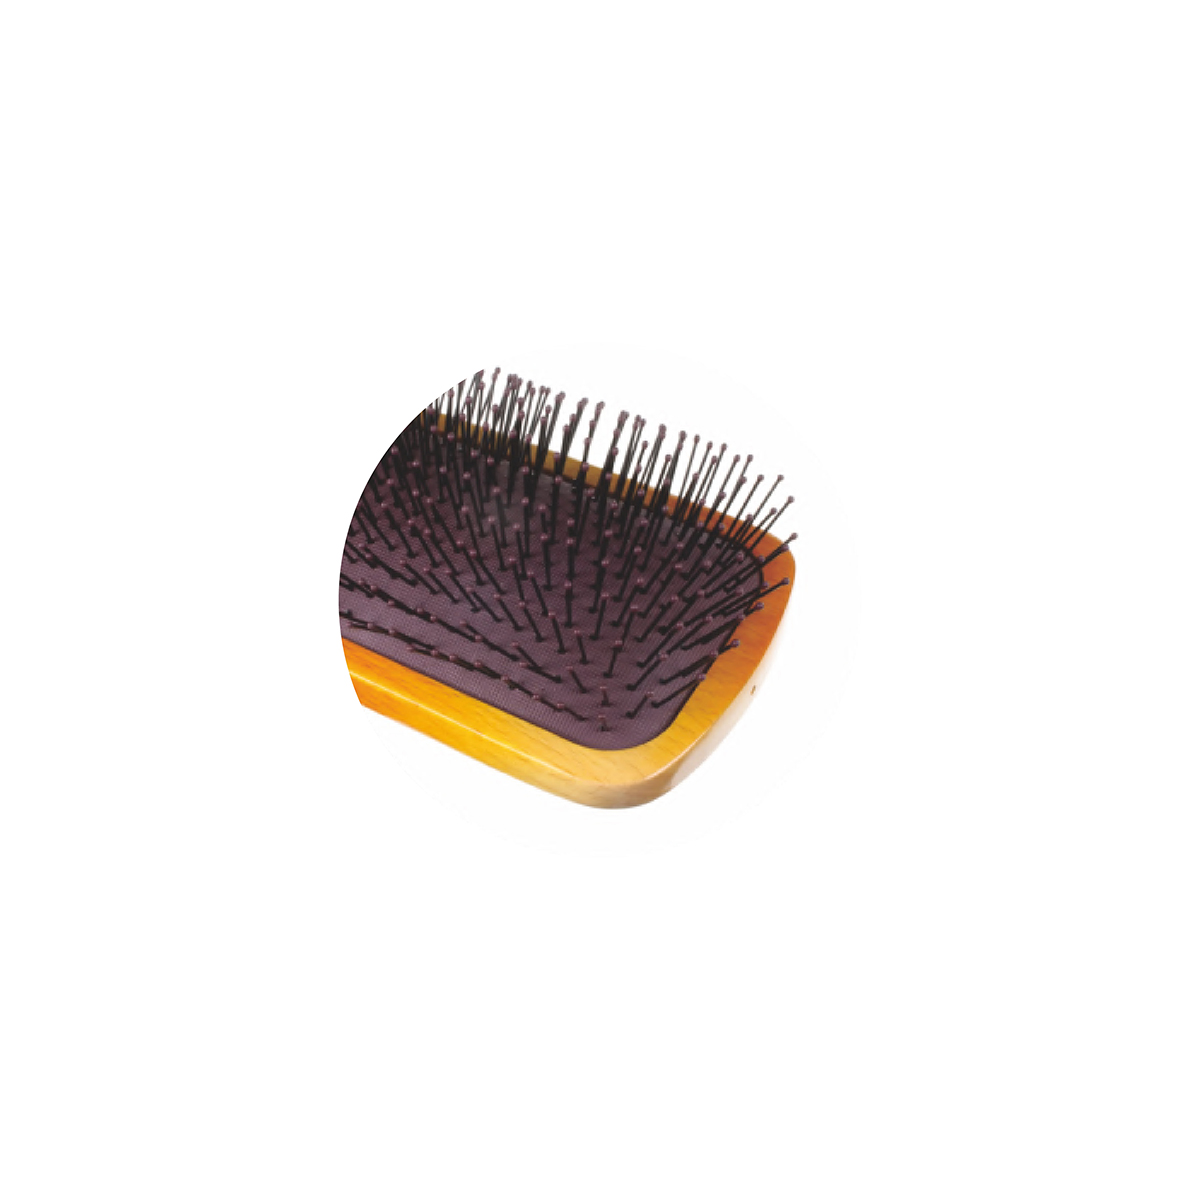 26-6294011522109-IQ-52210 IQUEEN SMALL OVAL CUSHION BRUSH-3